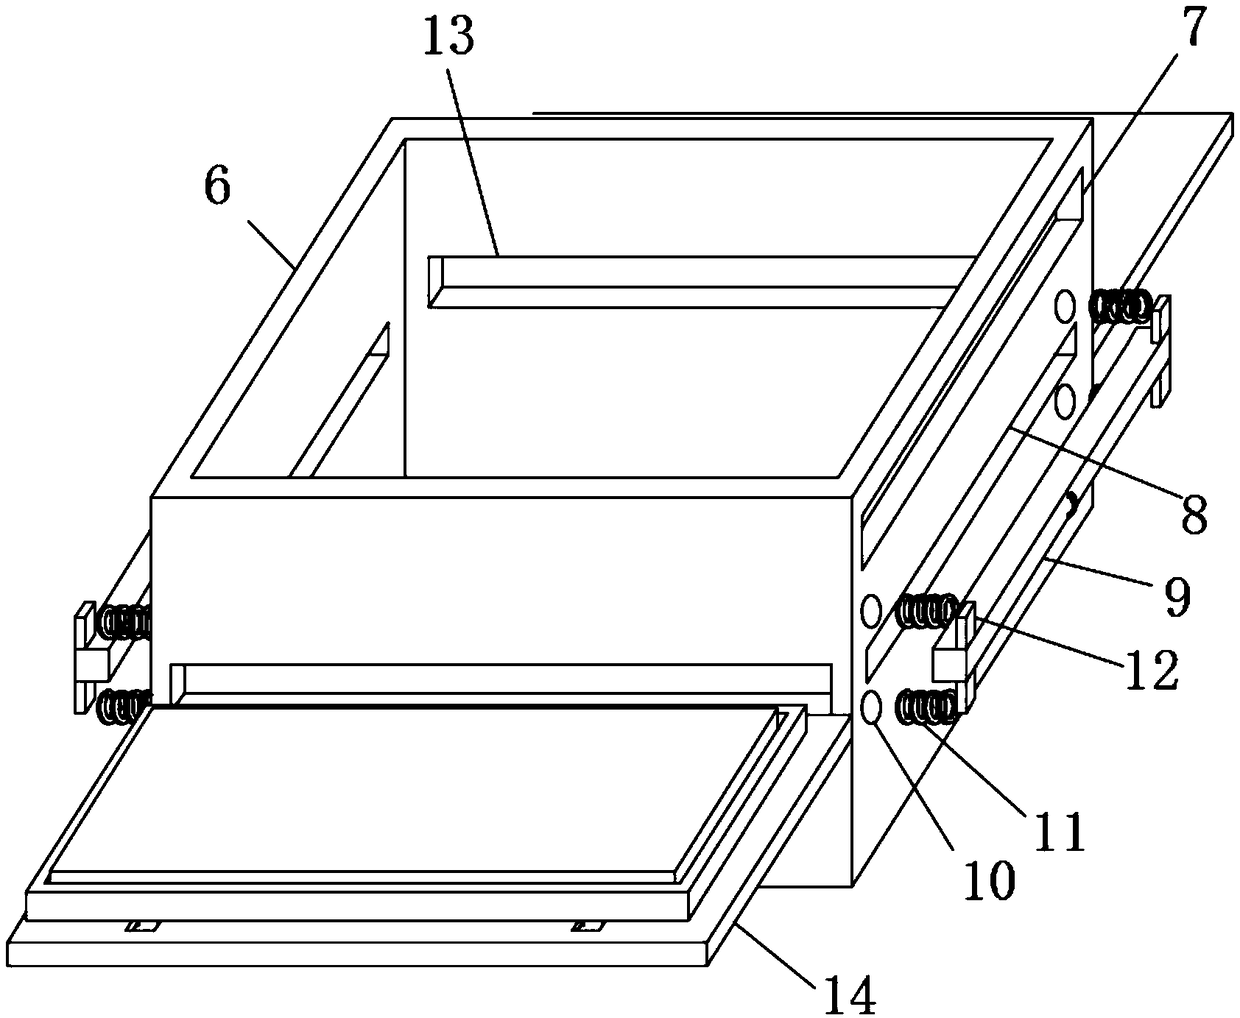 Quick adhesion device for square composite plates